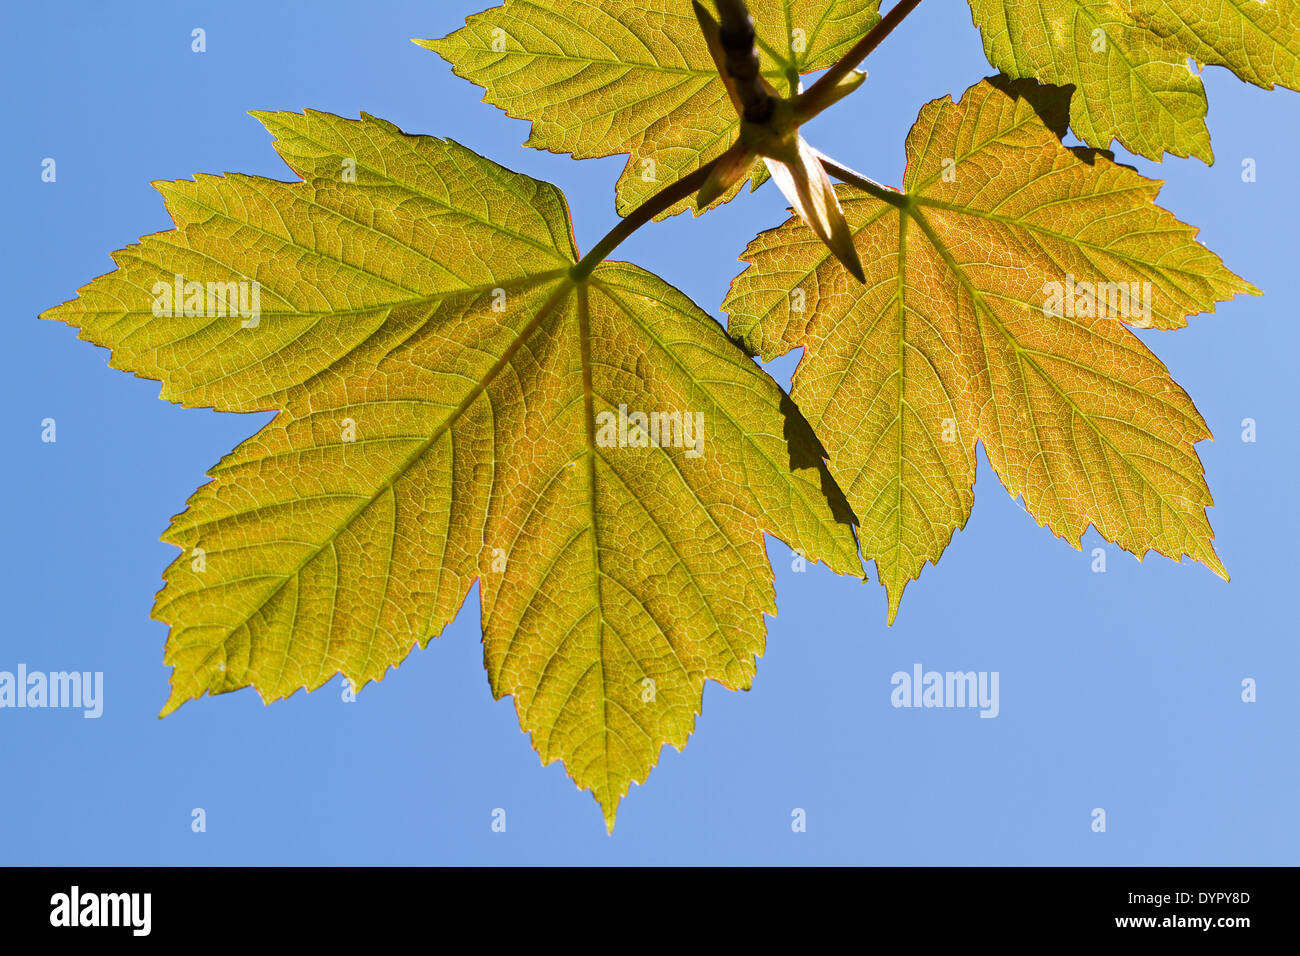 Sycamore maple tree (Acer pseudoplatanus) leaves against blue sky Stock Photo